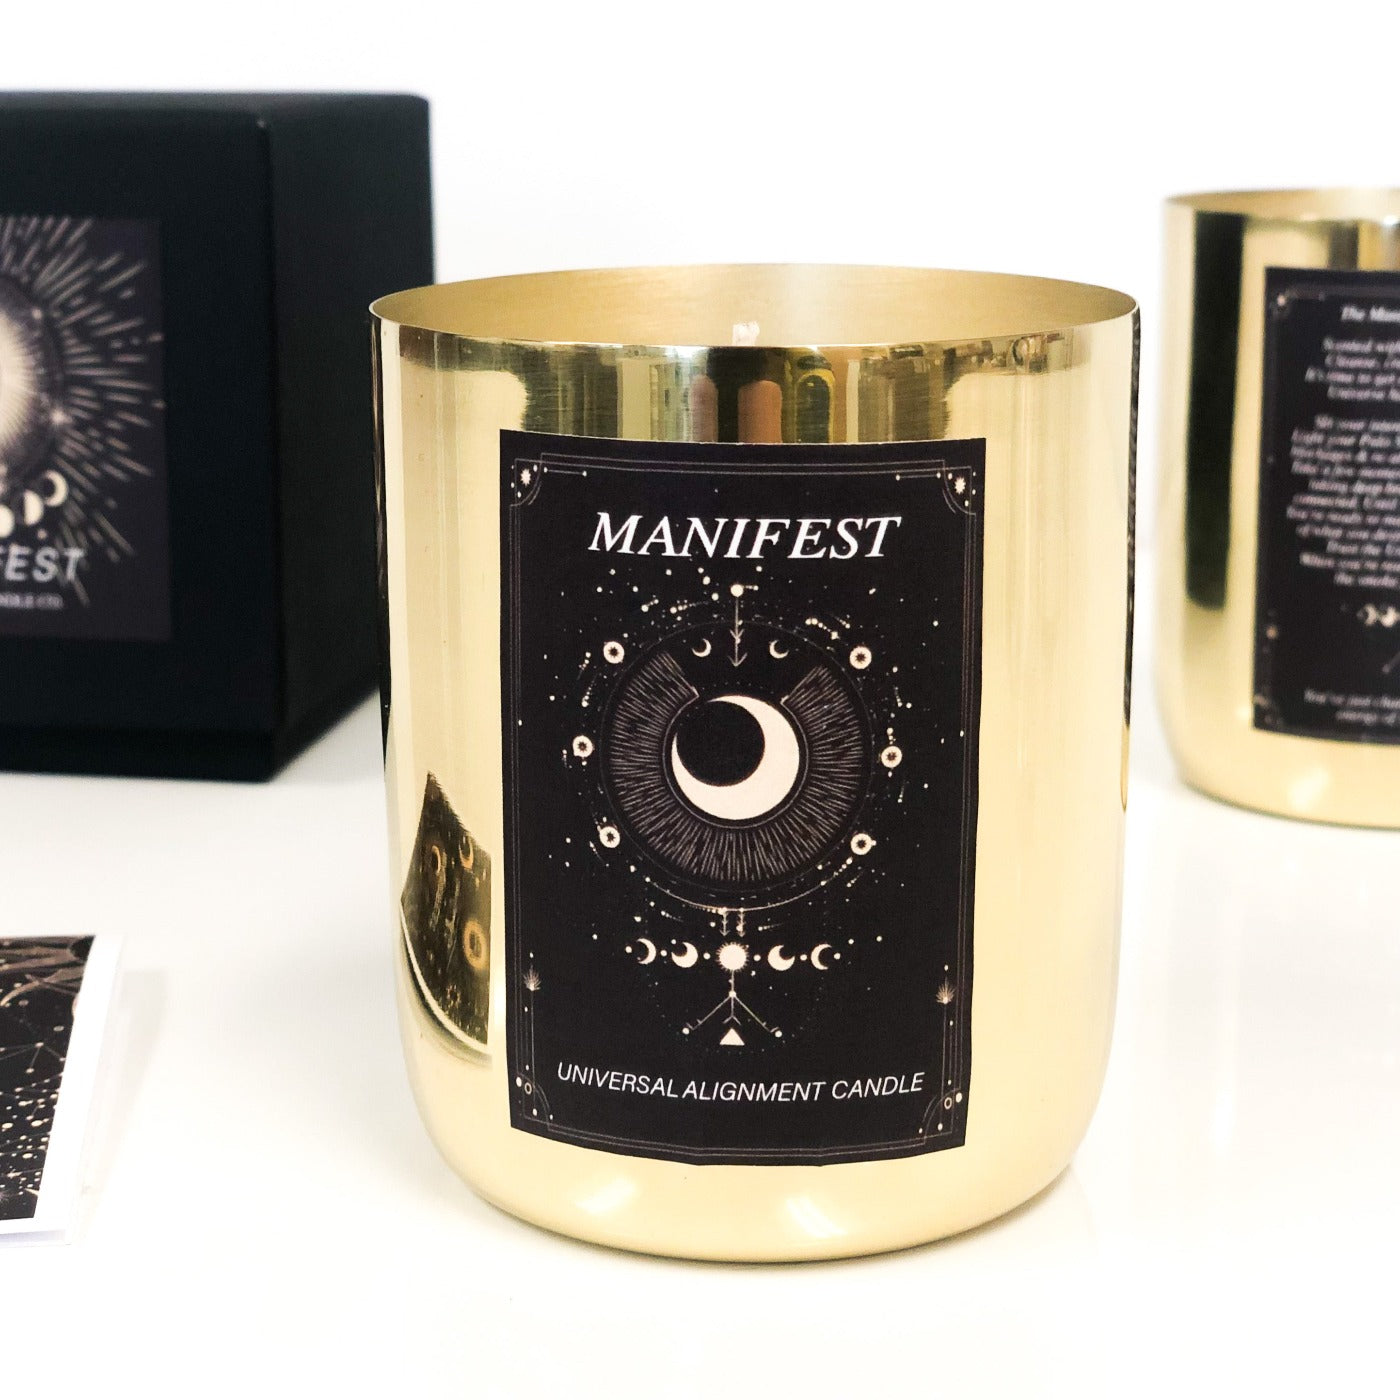 Feeling out of sorts ? Light a Manifest Universal alignment candle to get back on track.